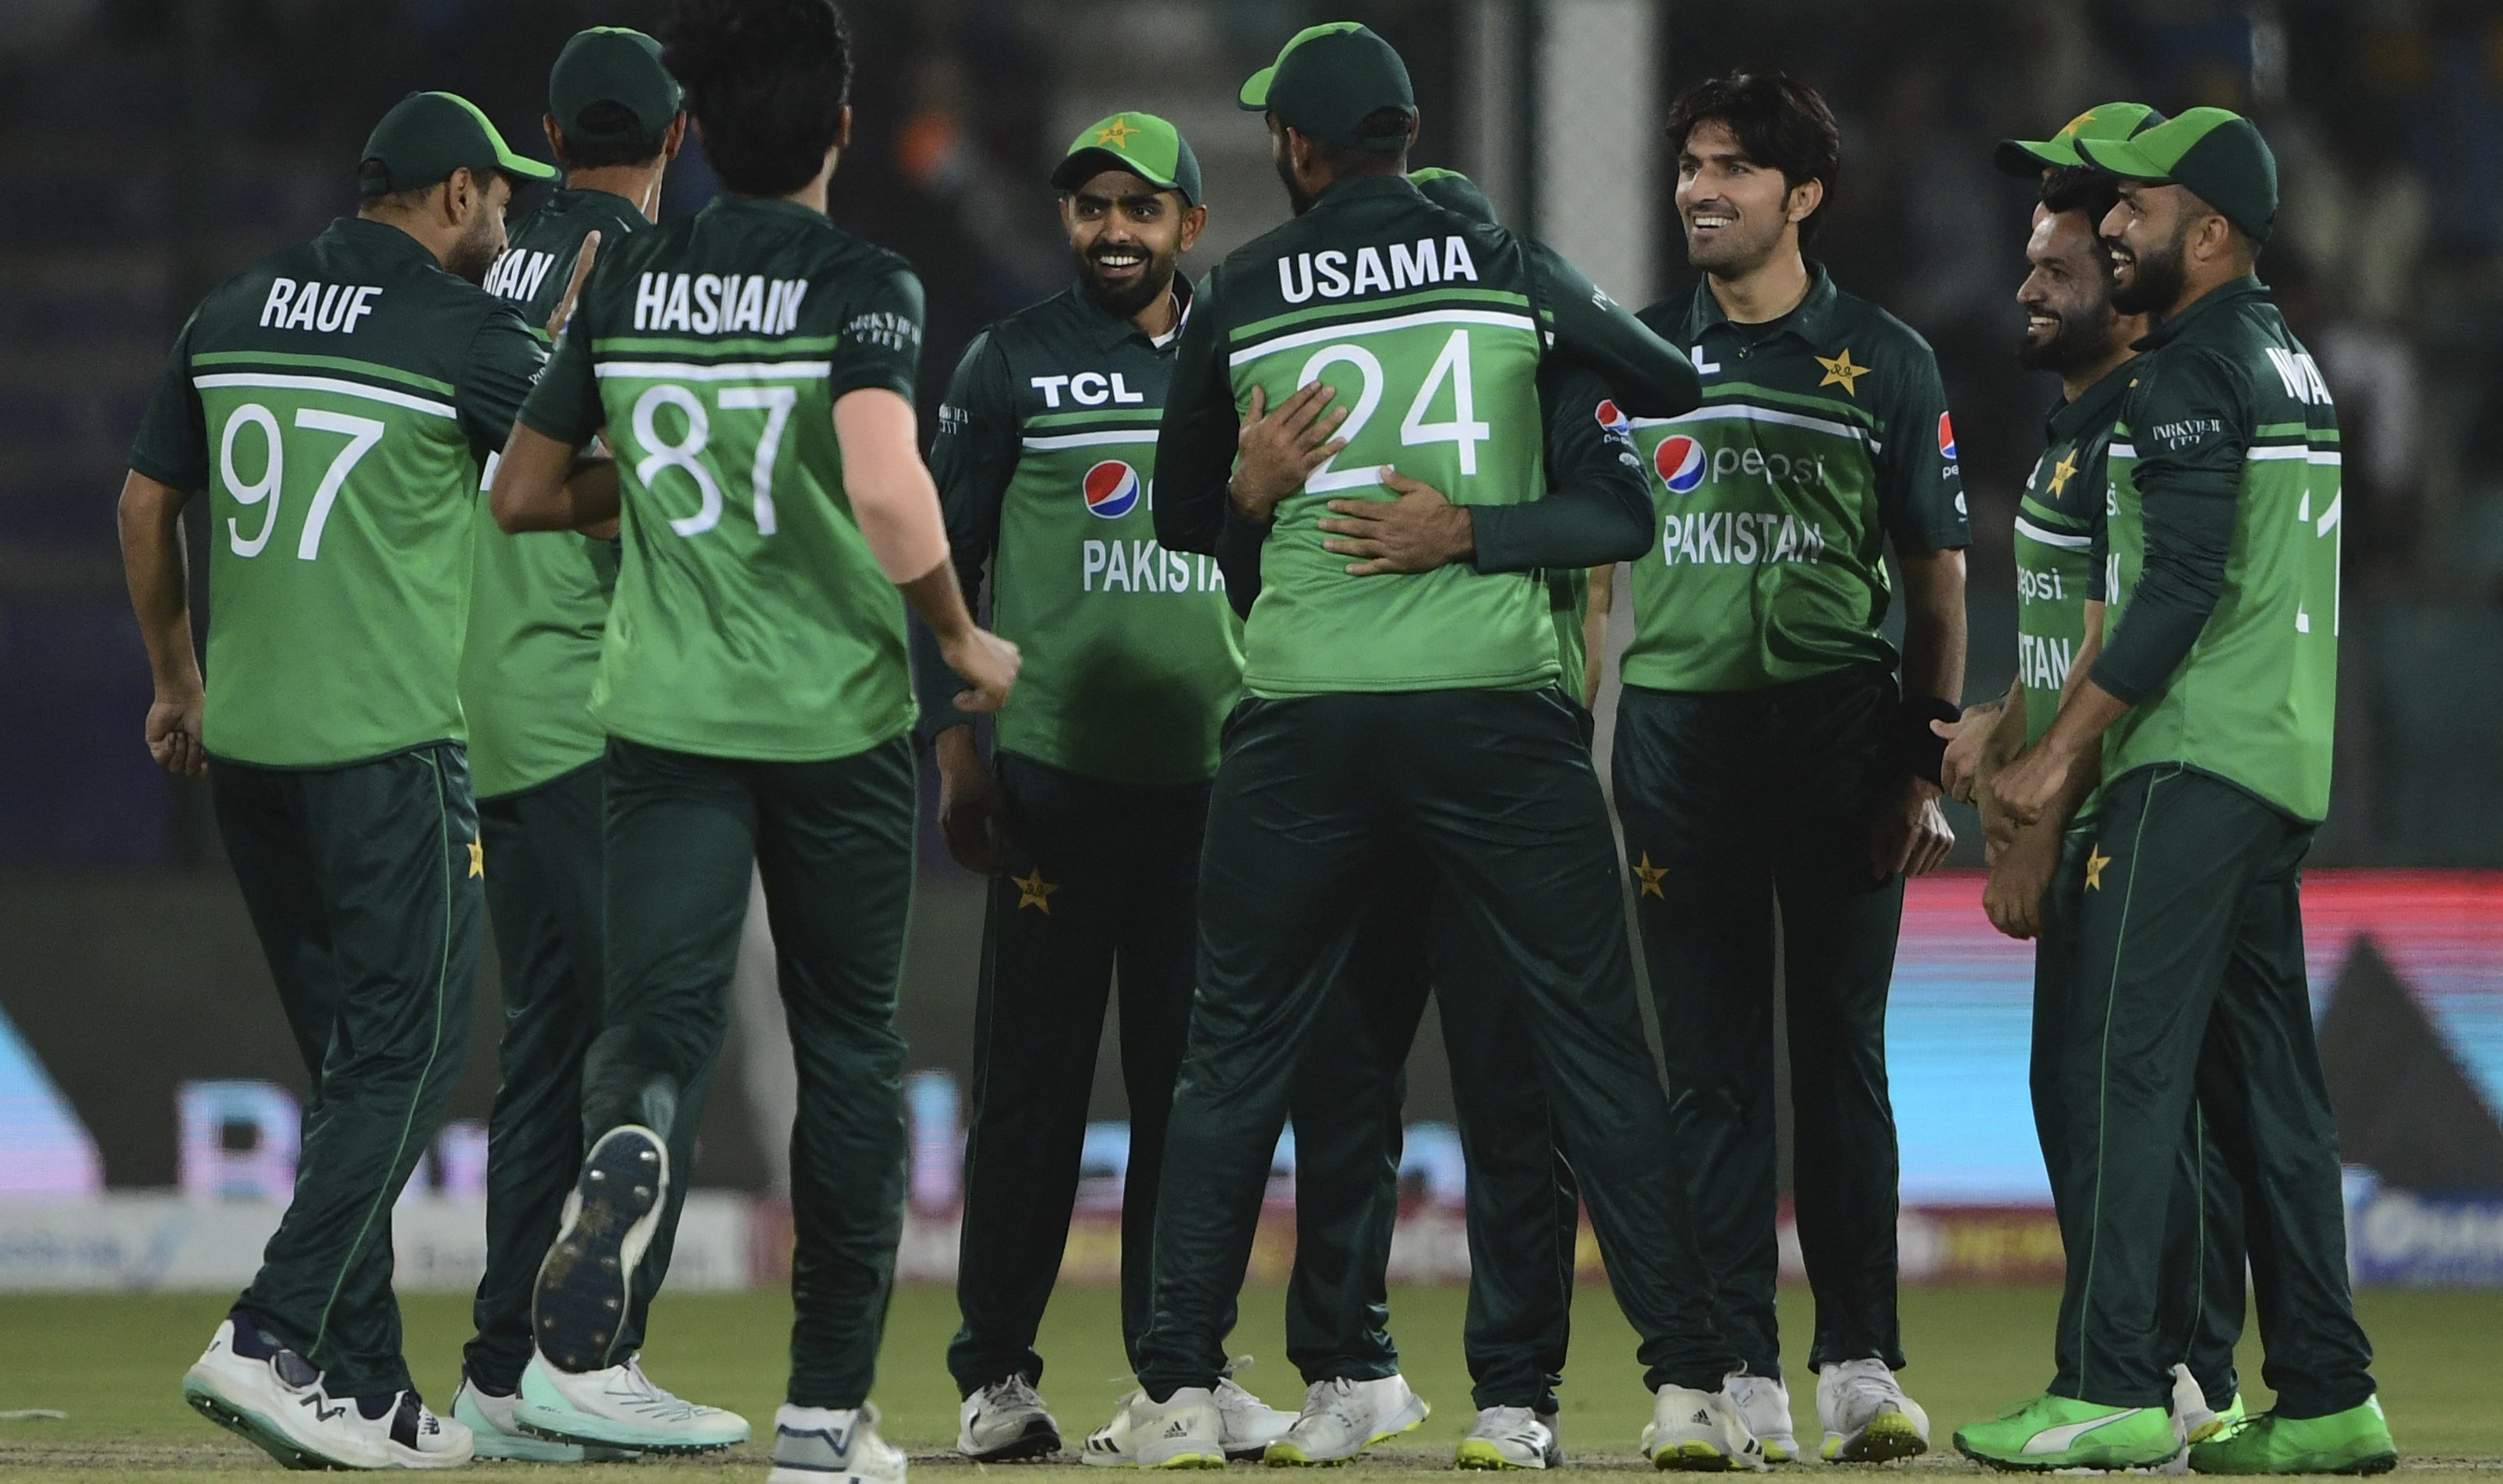 PAK vs NEP LIVE Score: Pakistan vs Nepal in Asia Cup 2023 opener in Multan on Wednesday, August 30. PAK will play 1st match as No 1 team